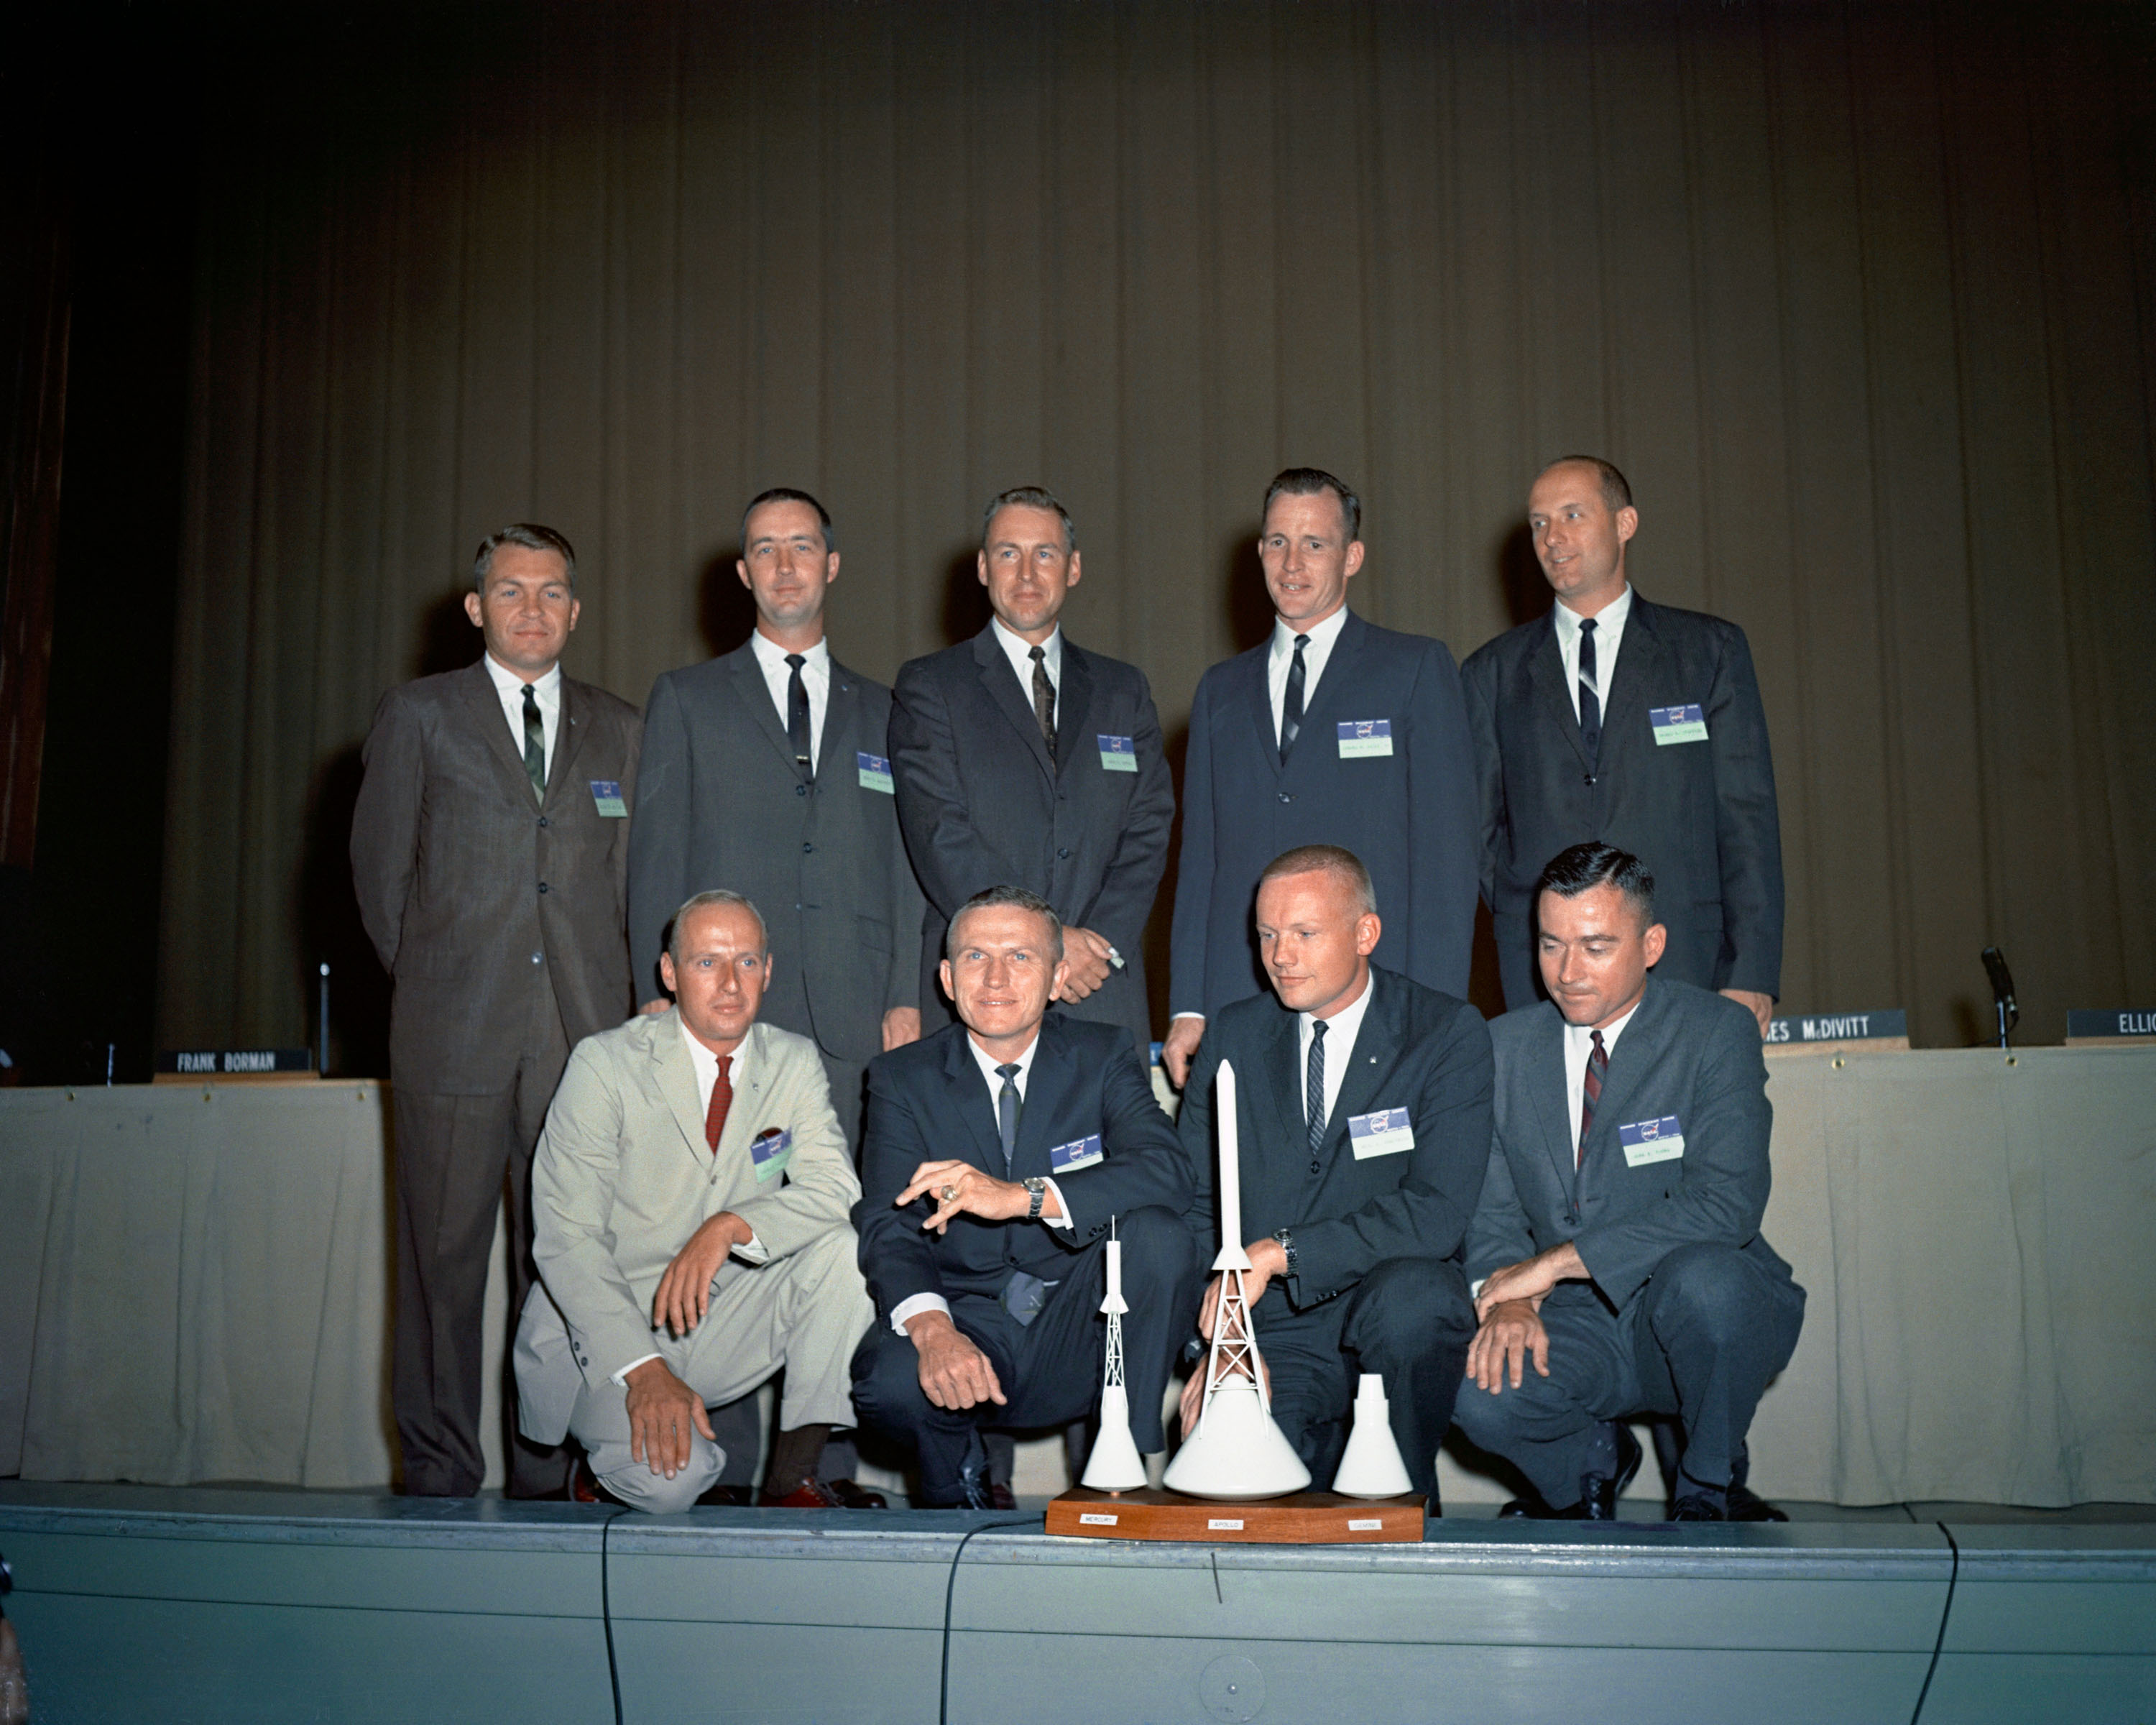 The second group of astronauts to work on the moon mission were announced by NASA from Cullen Performance Hall on September 17, 1962. | NASA/Courtesy Photo.